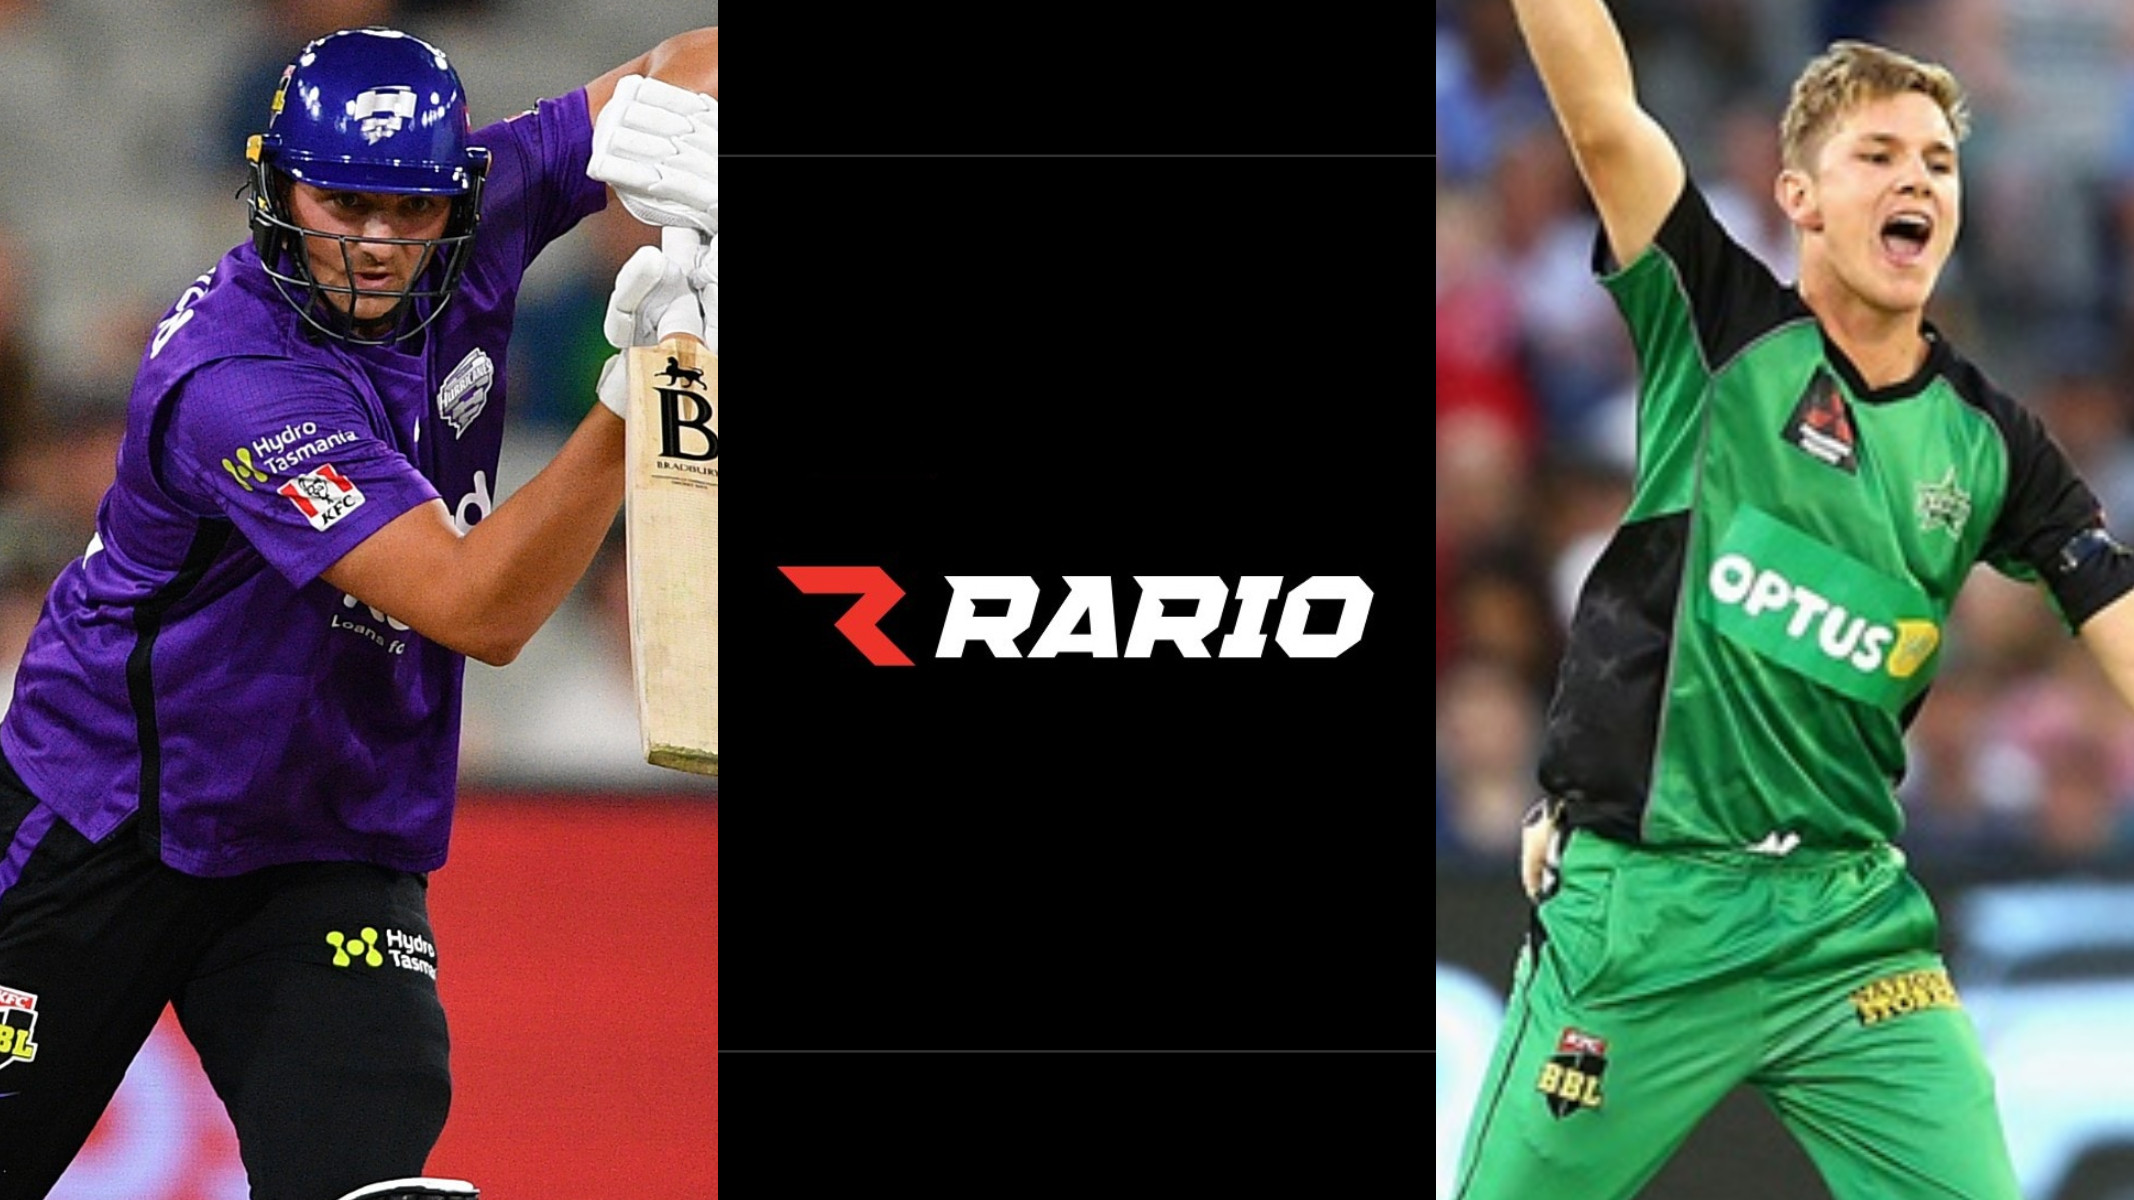 Rario D3 Predictions: Grab exciting player cards for Big Bash League and play for great prizes